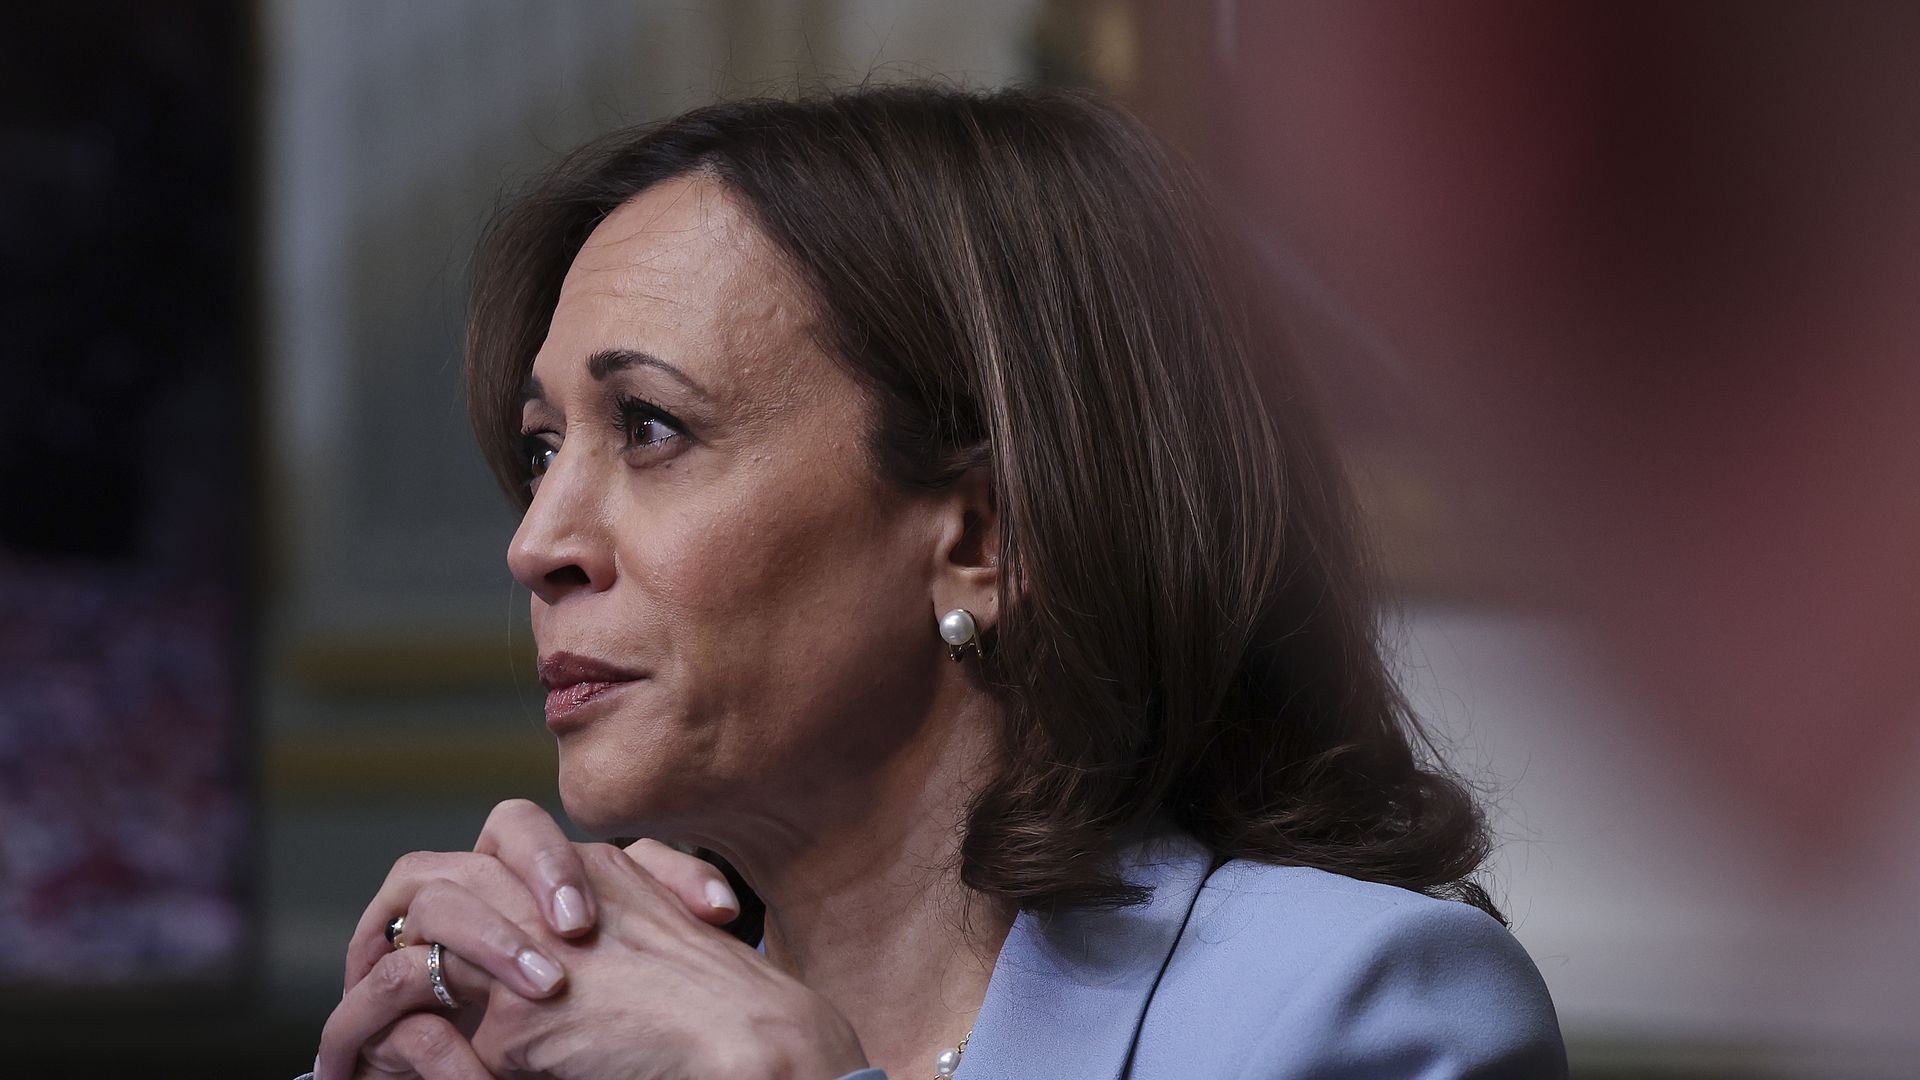 A close shot of Vice President Kamala Harris resting her head on her hands, which are interwoven.